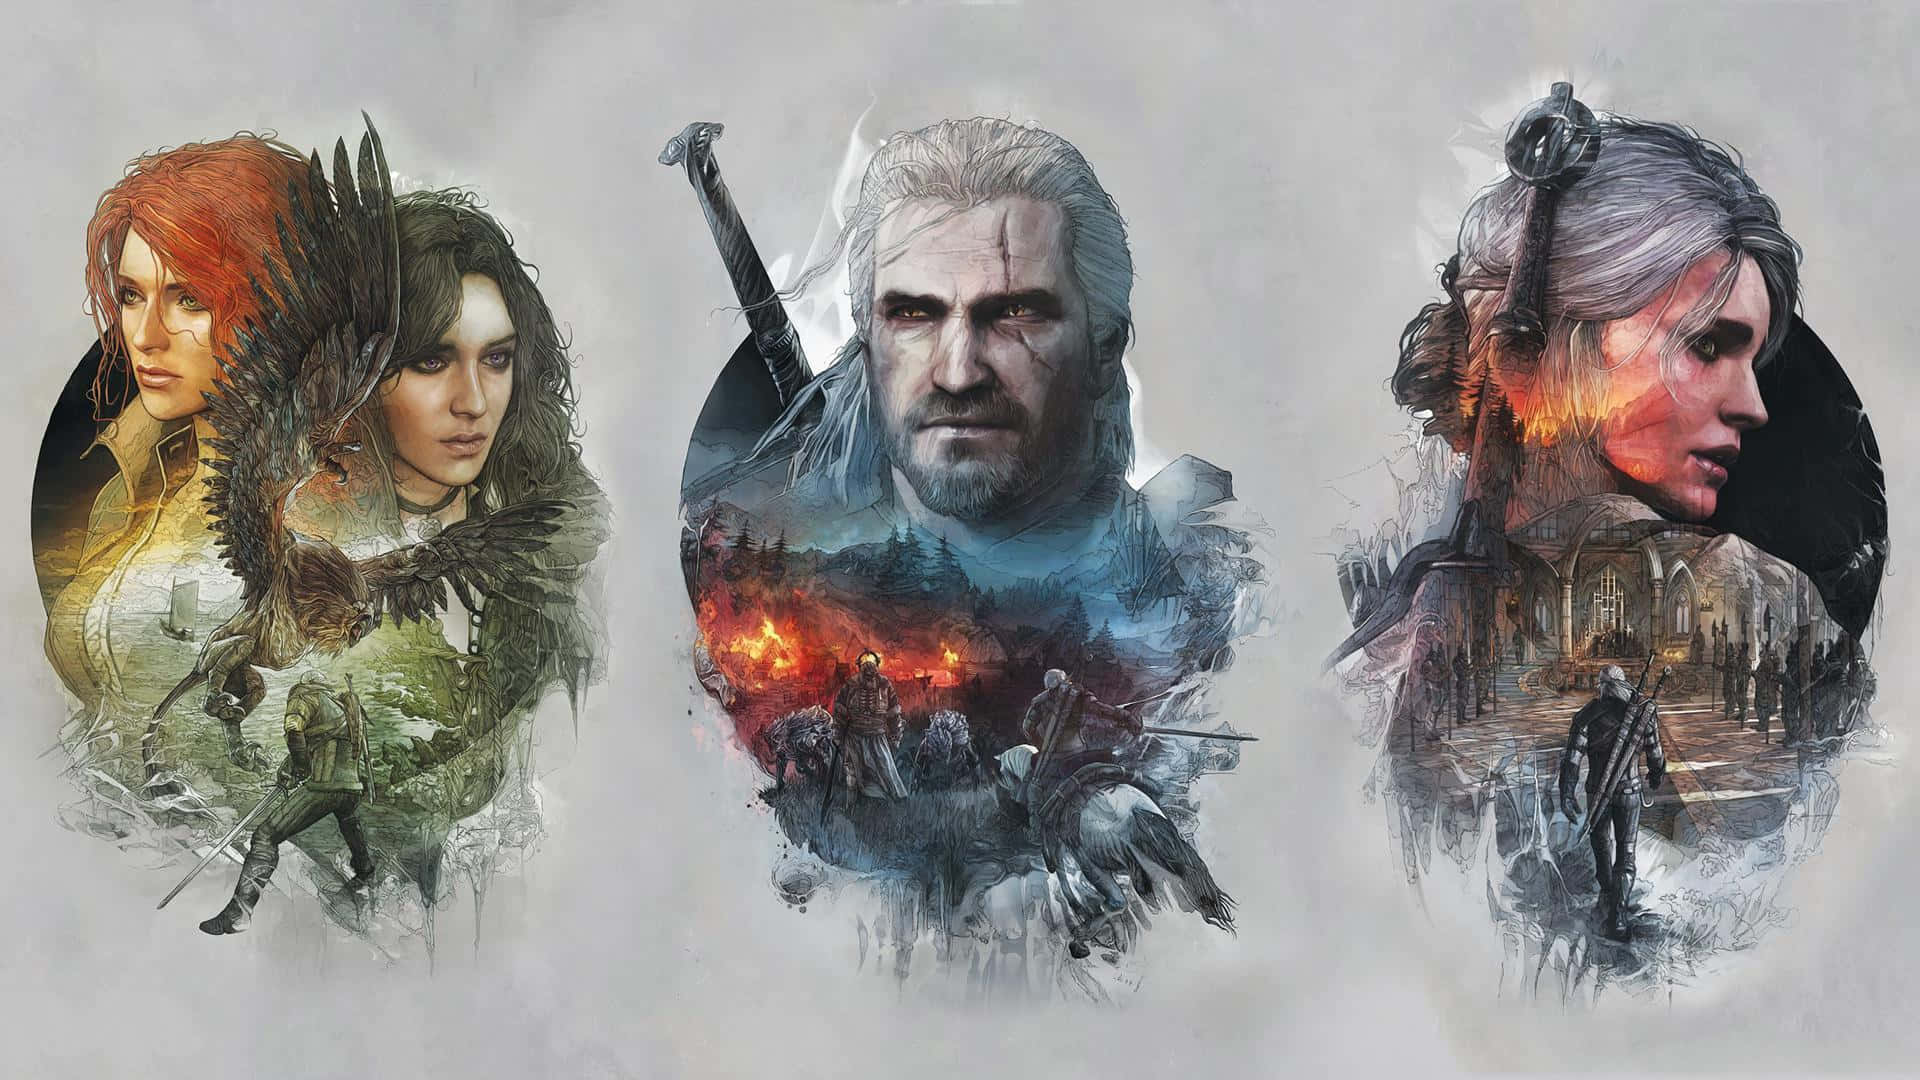 Journey into the world of The Witcher 3: Wild Hunt Wallpaper